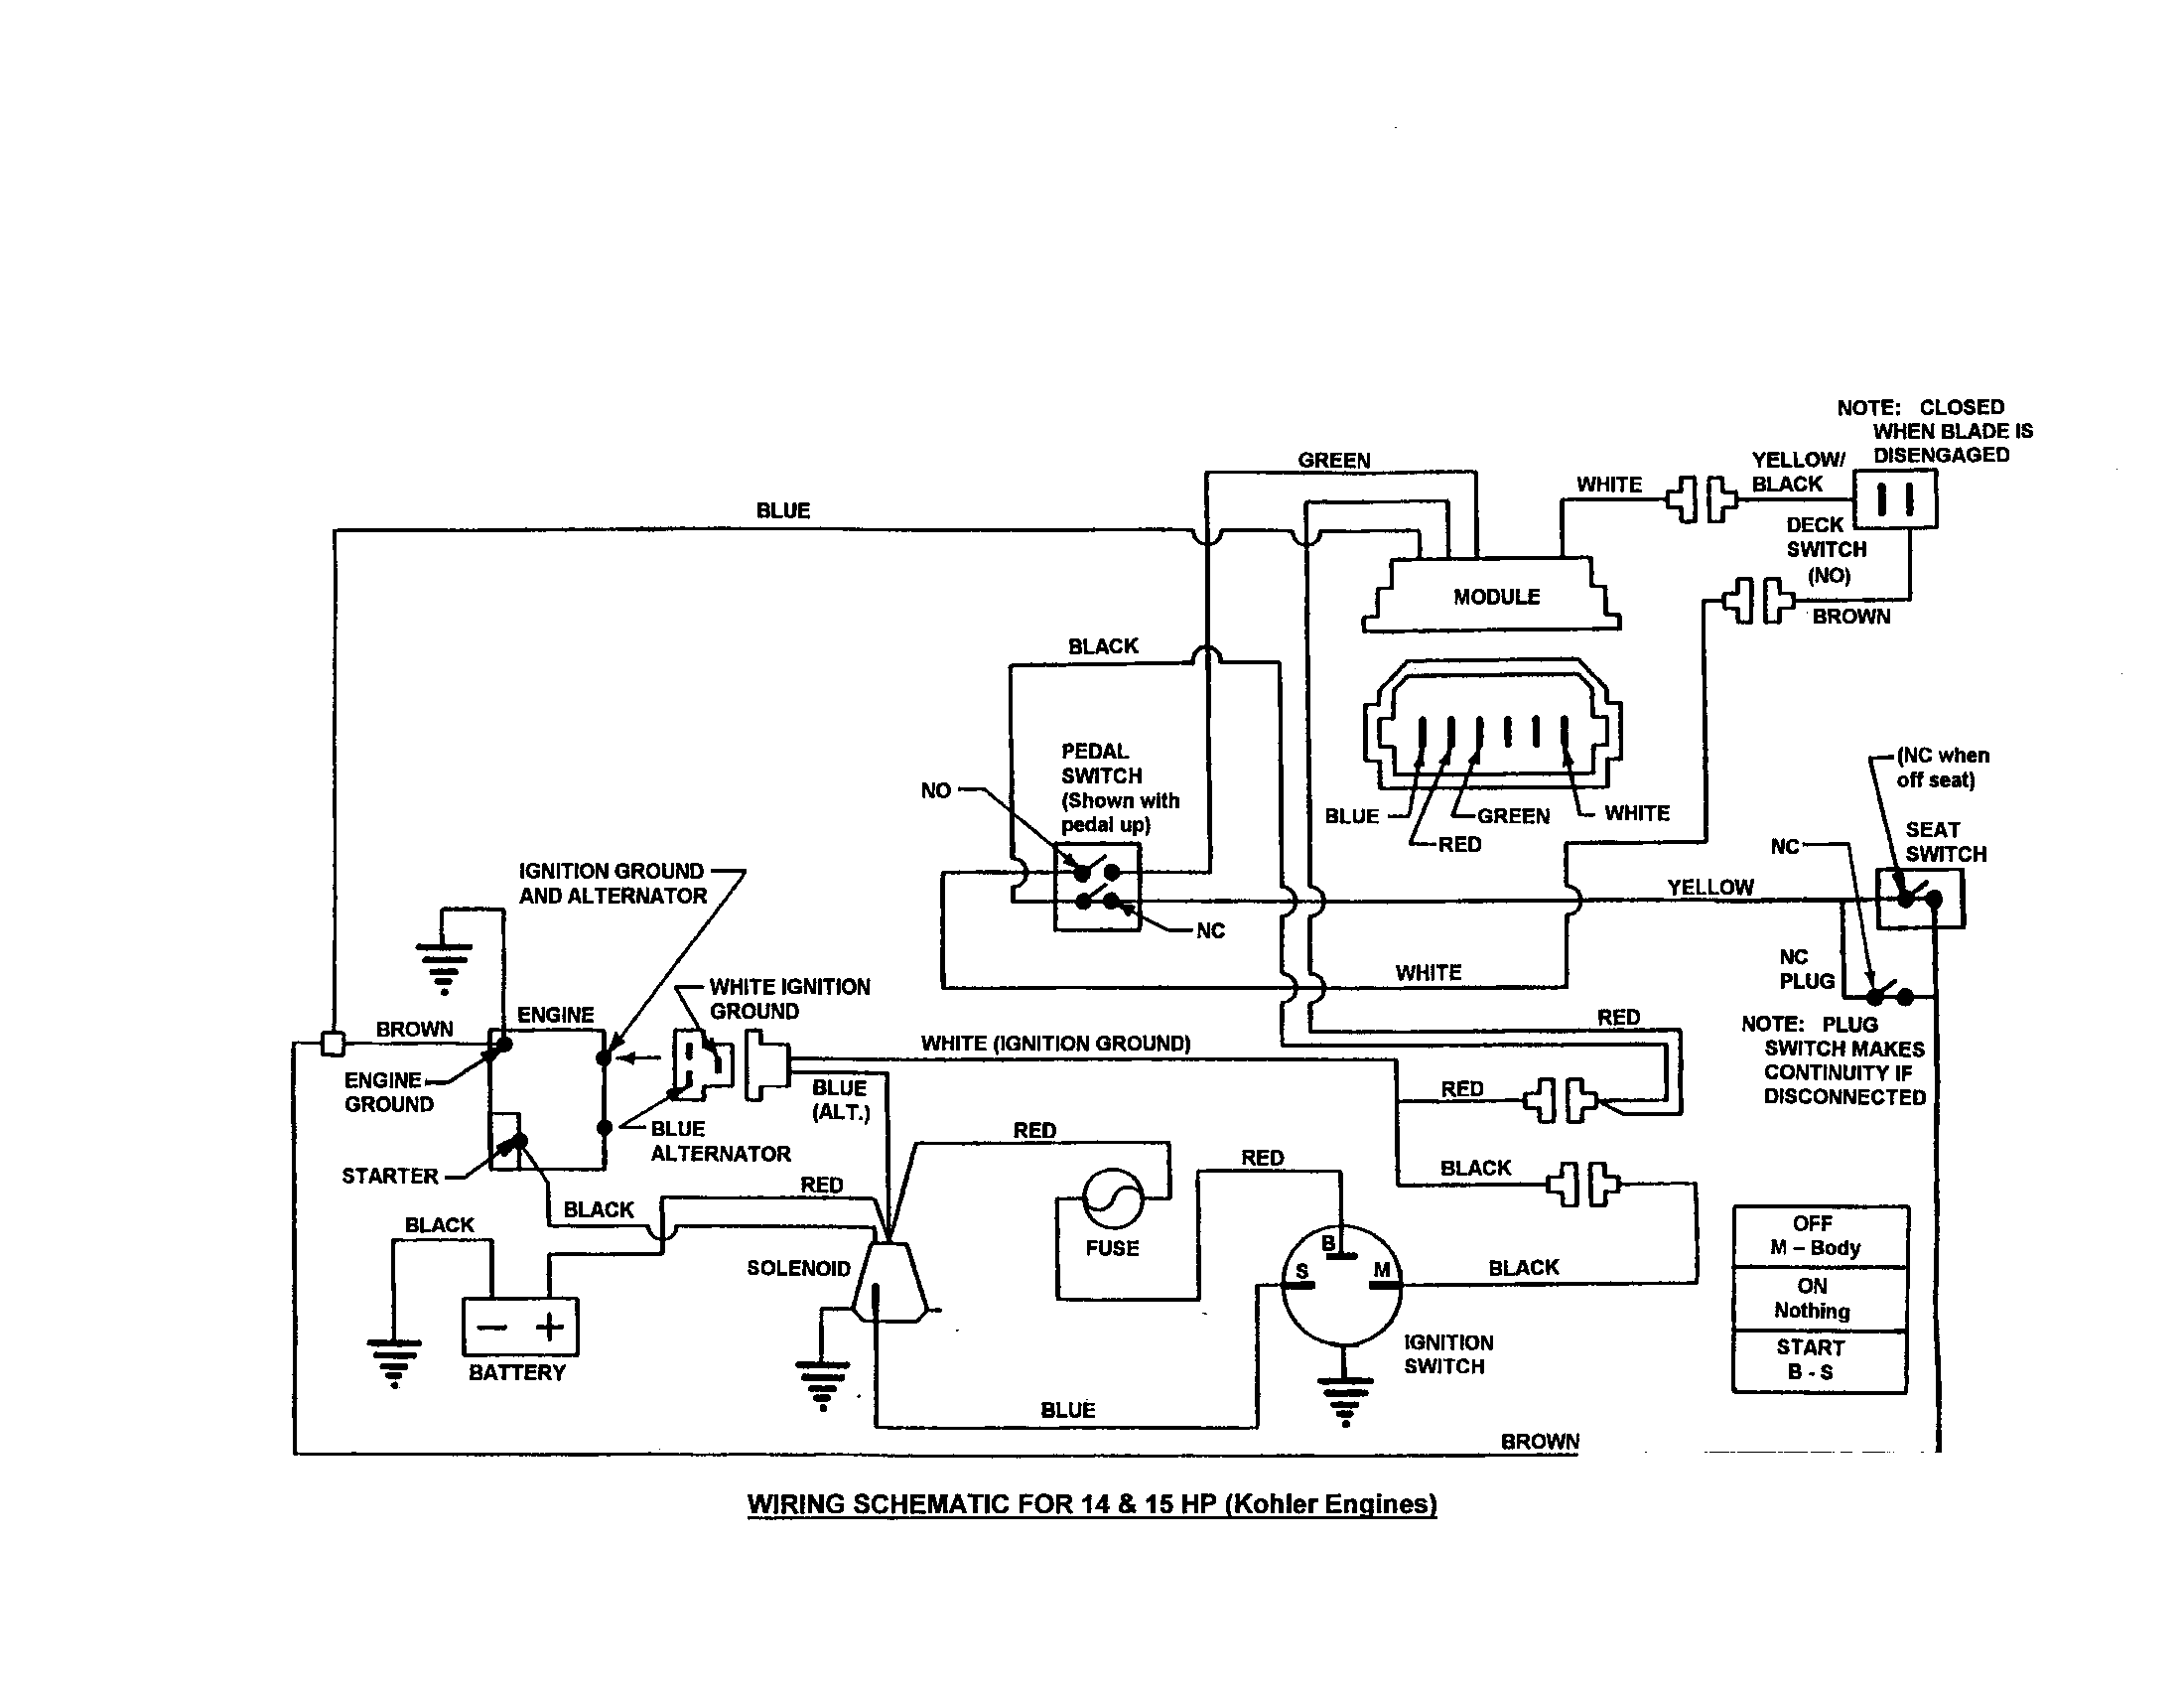 20 Hp Kohler Engine Wiring Diagram from c.searspartsdirect.com